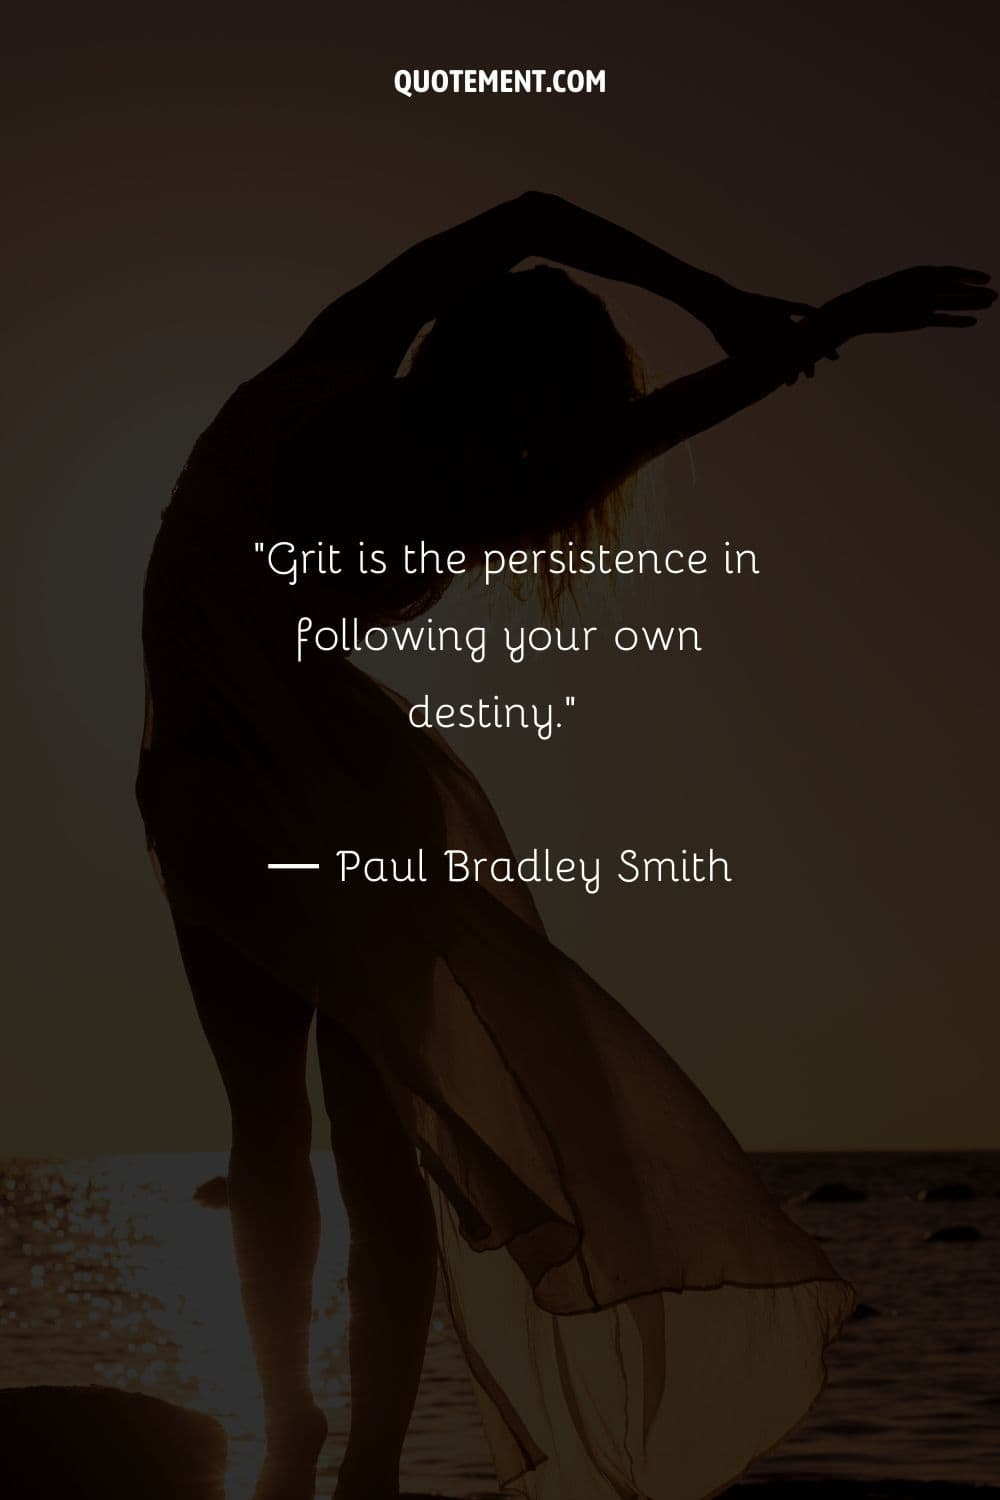 Grit is the persistence in following your own destiny